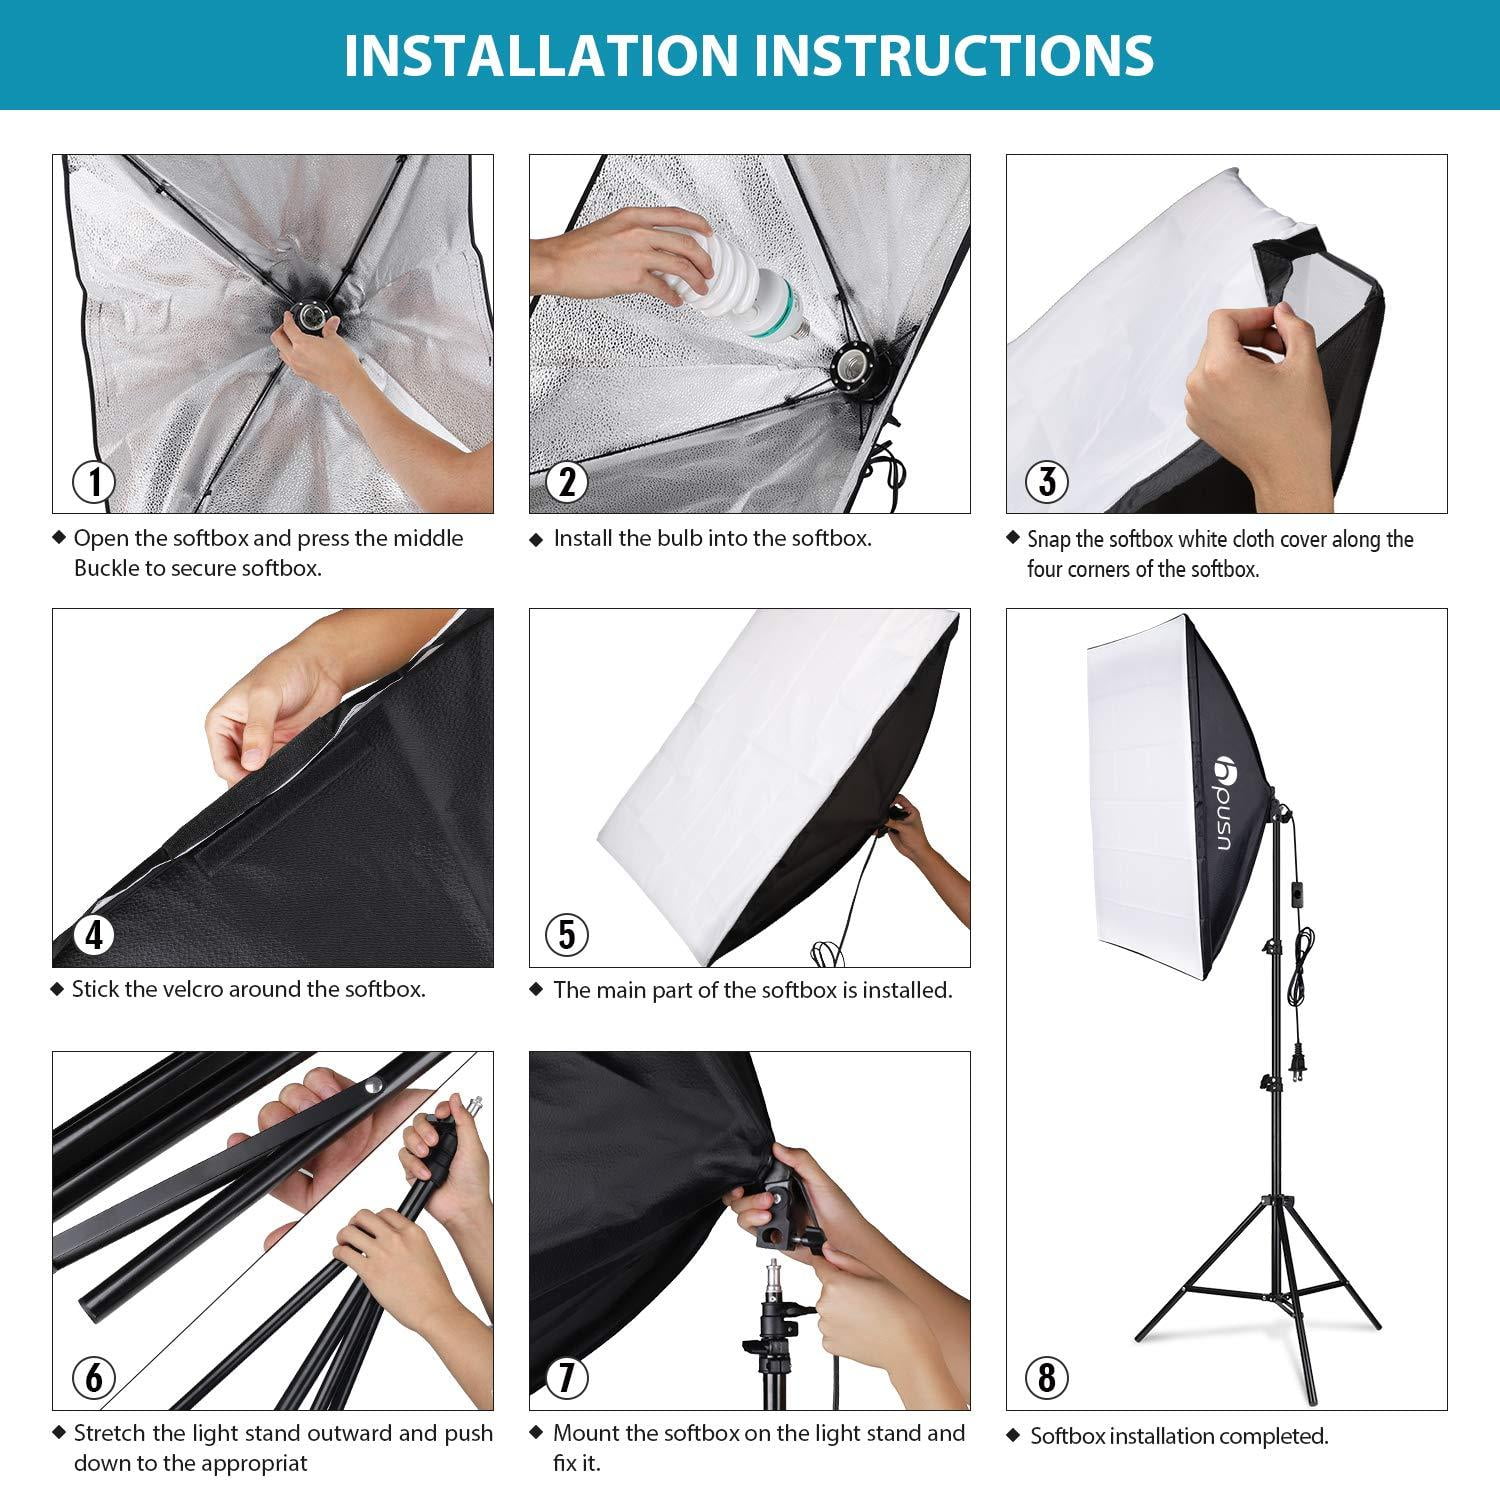 HPUSN Softbox Lighting Kit Continuous Equipment with 85W 5500K E27 Socket Light and 2 Reflectors 50 x 70 cm and 2 Bulbs Sand Bag Carr Background Support System Kit for Photography Studio with Clamp 